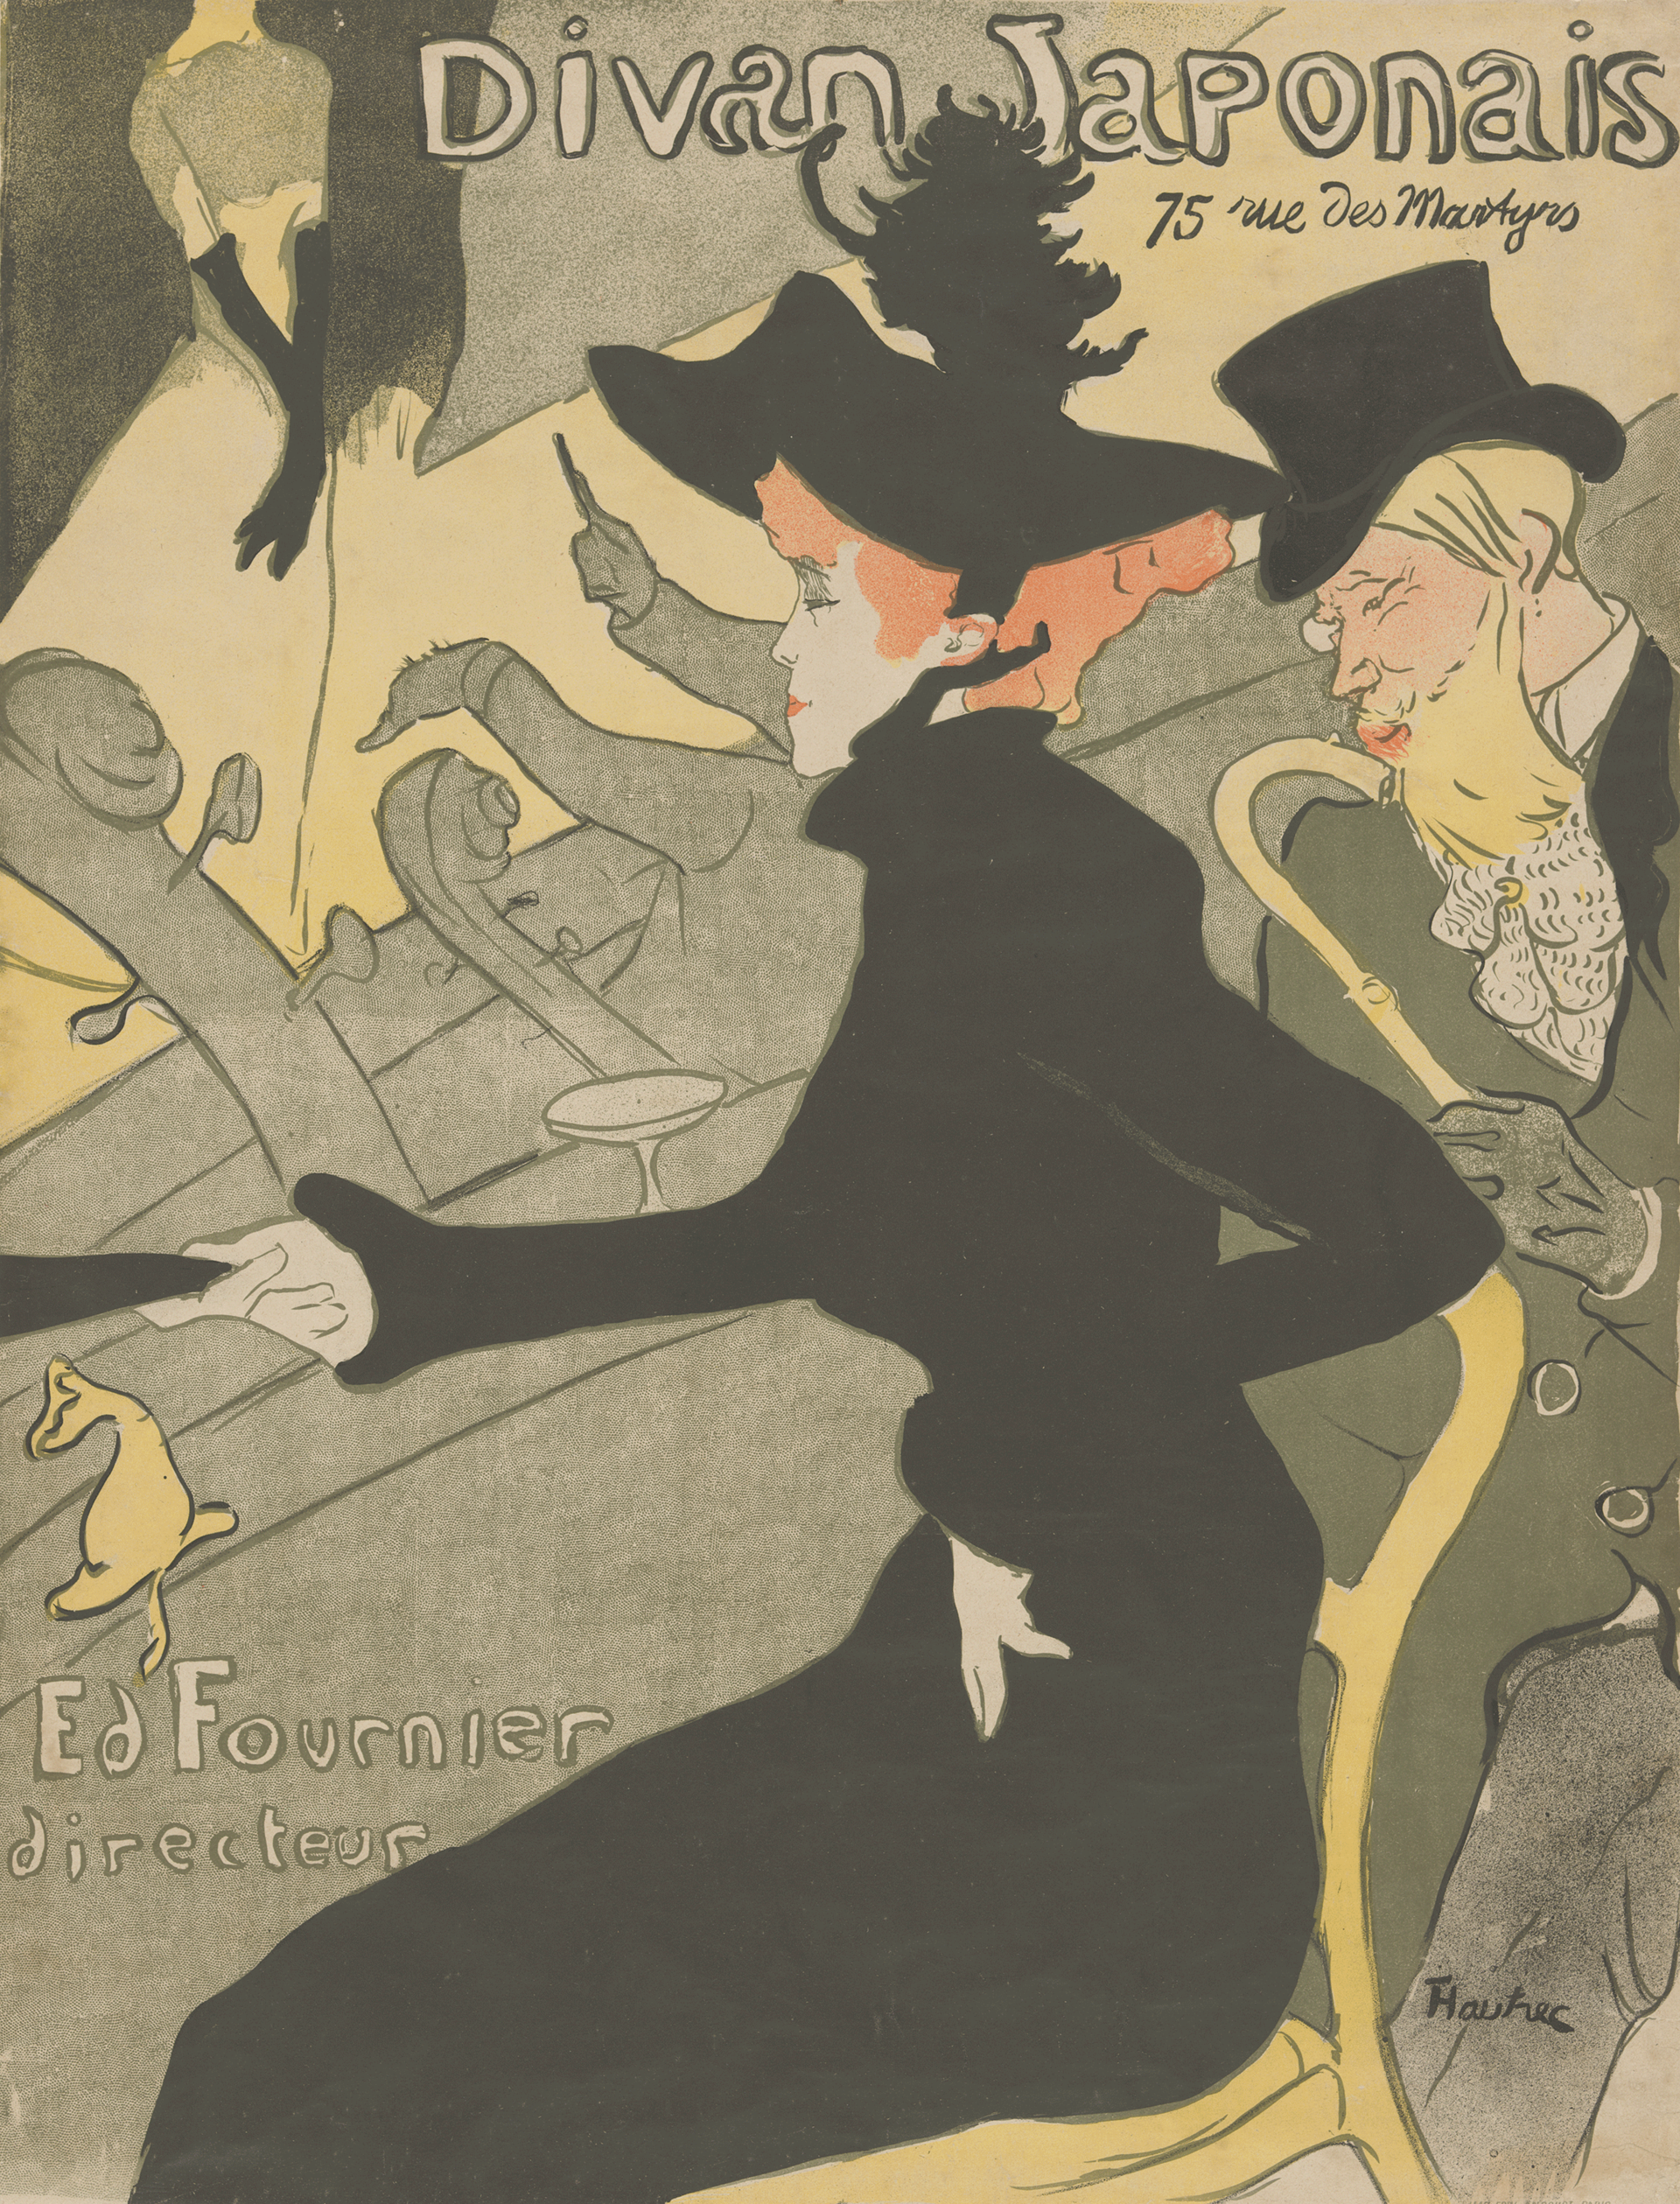 A red-haired light-skinned woman in a black dress and a blonde bearded man in top hat sit in profile before a performer onstage. Strong diagonals in greens, yellows, and blacks. Script at top reads: “Divan Japonais, 75 rue des Martyrs.”